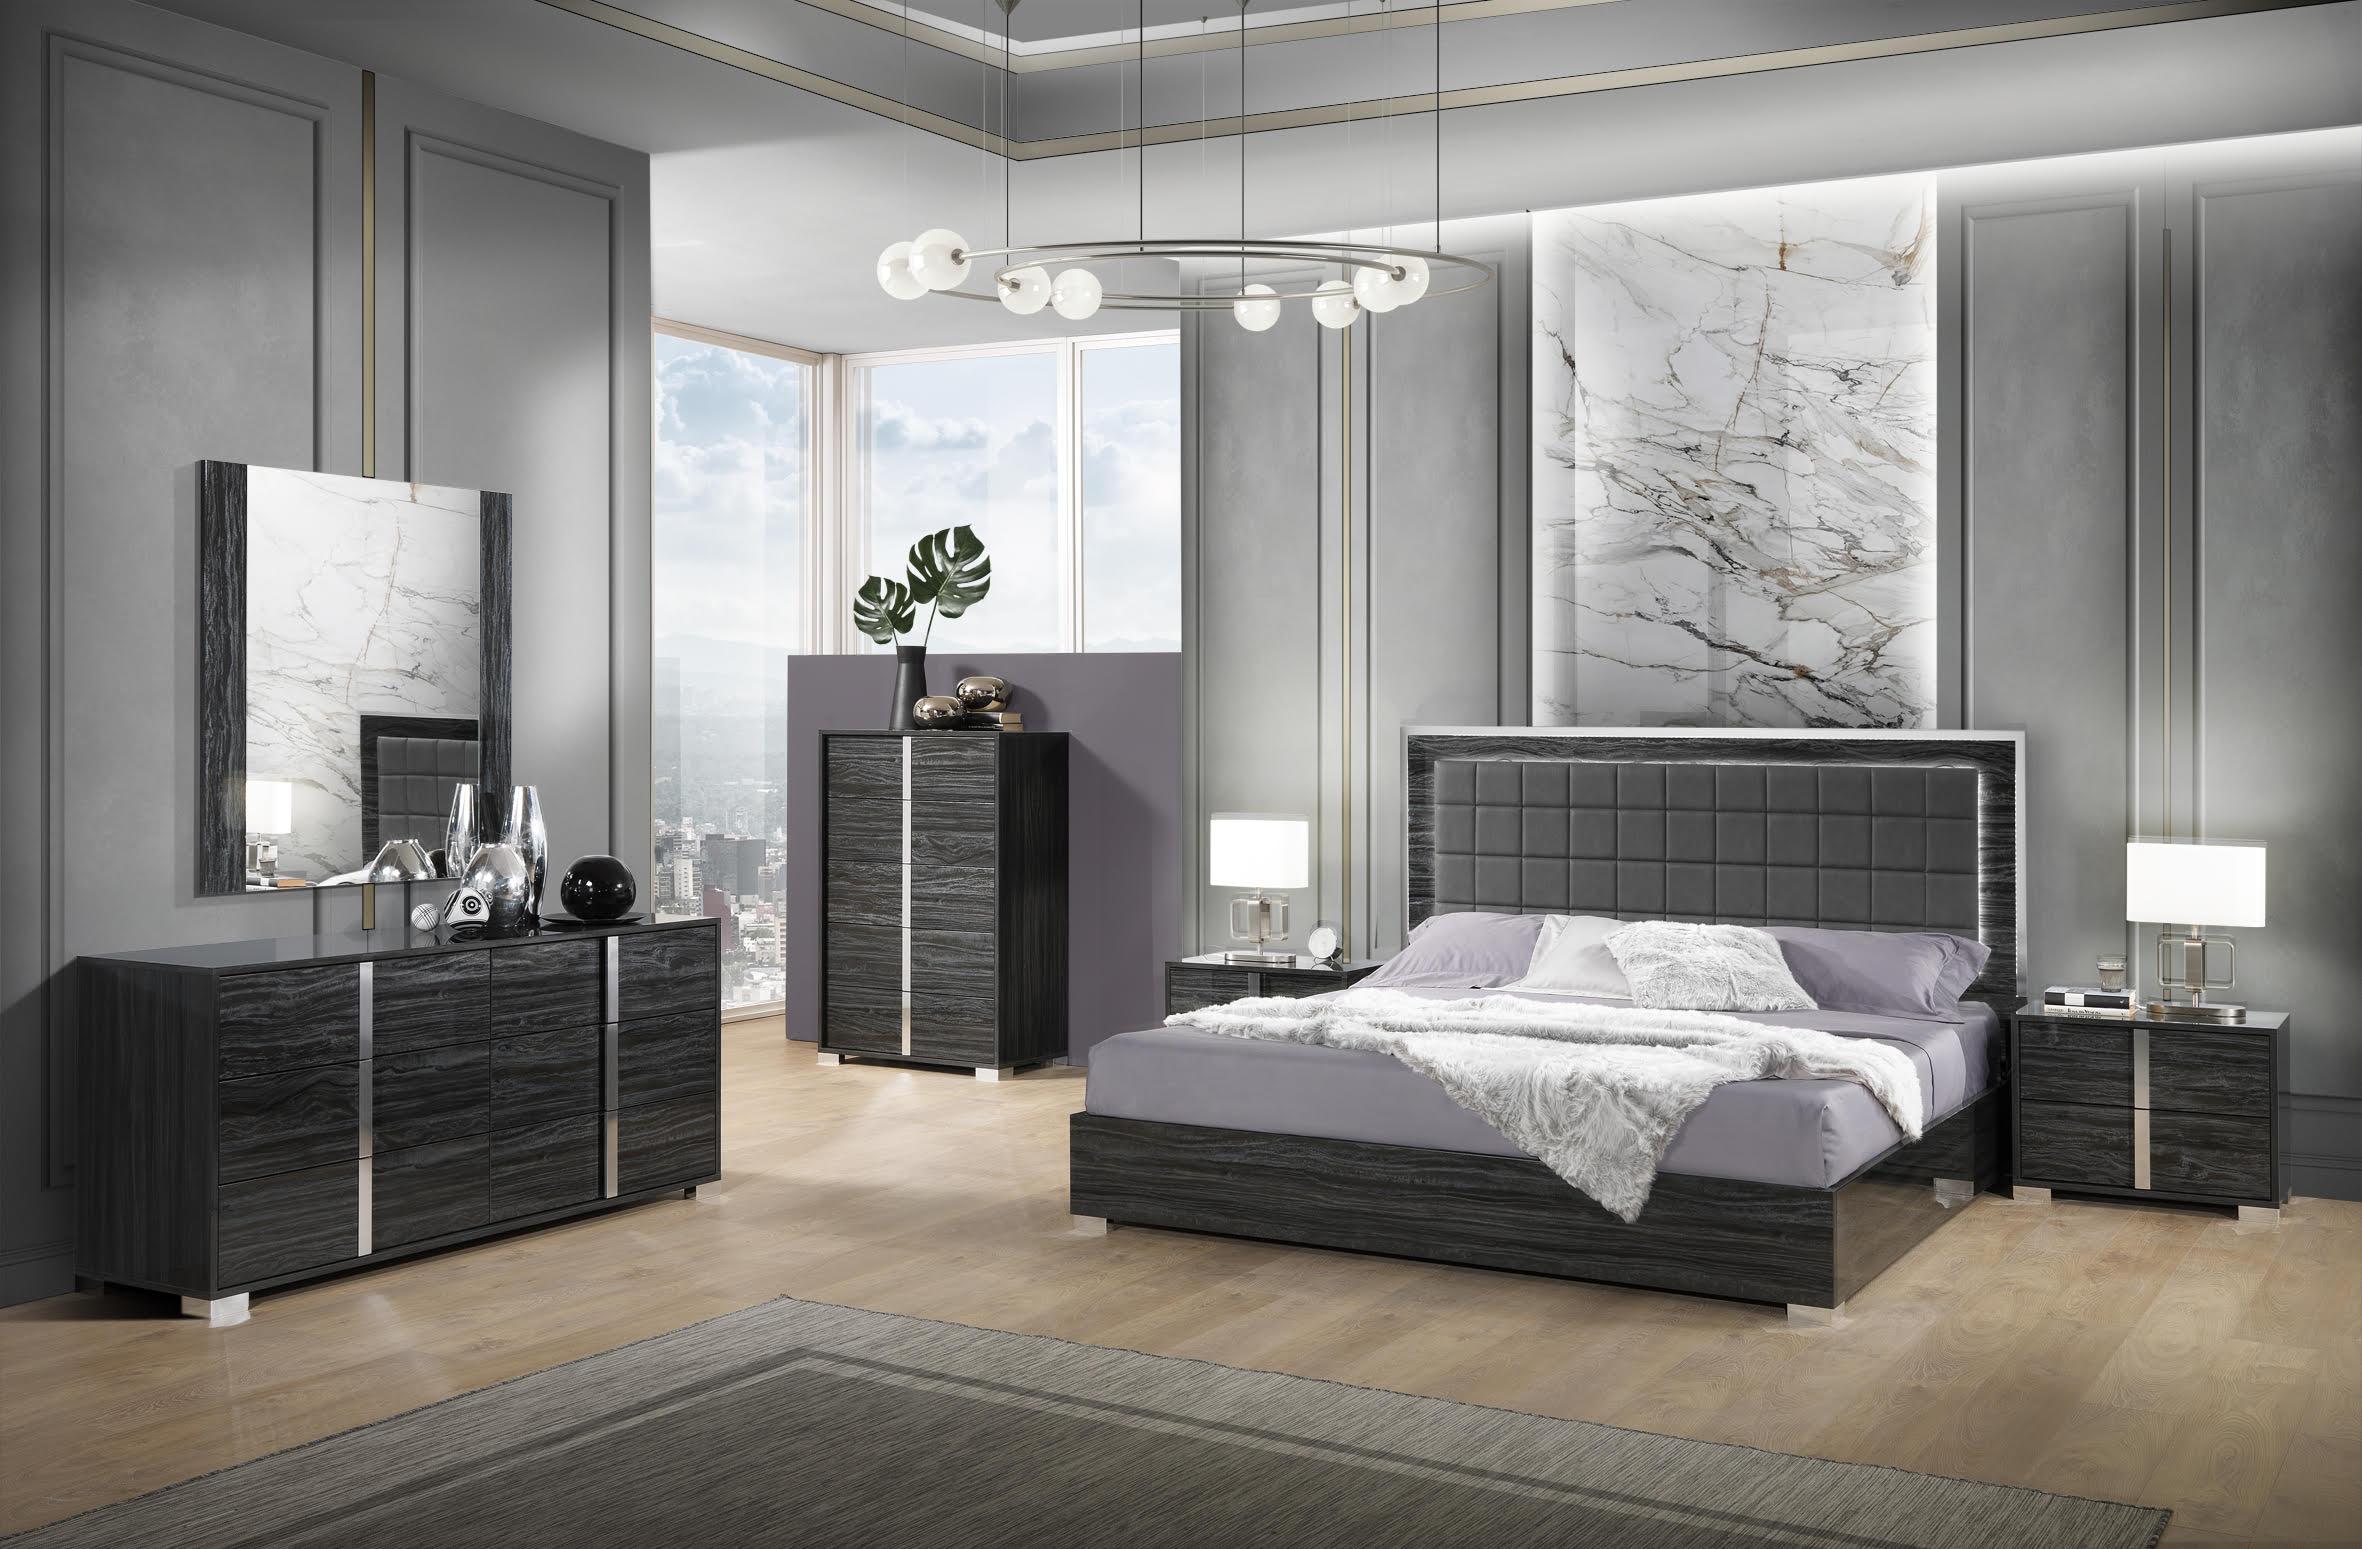 

    
Contemporary King Size Bedroom Set 5Pcs in Gloss Grey MADE IN ITALY J&M Alice
